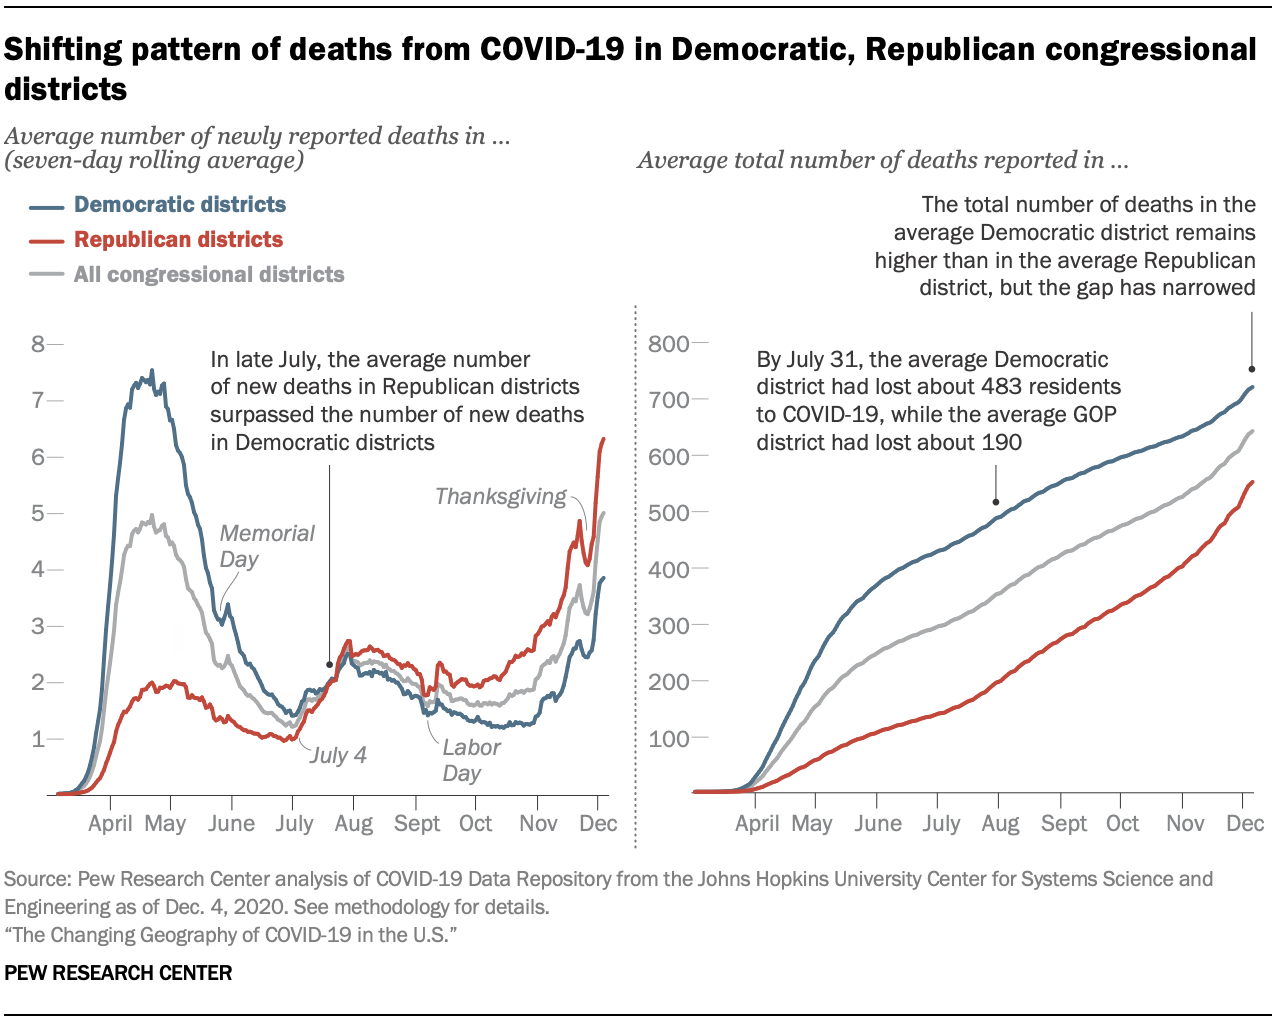 Shifting pattern of deaths from COVID-19 in Democratic, Republican congressional districts